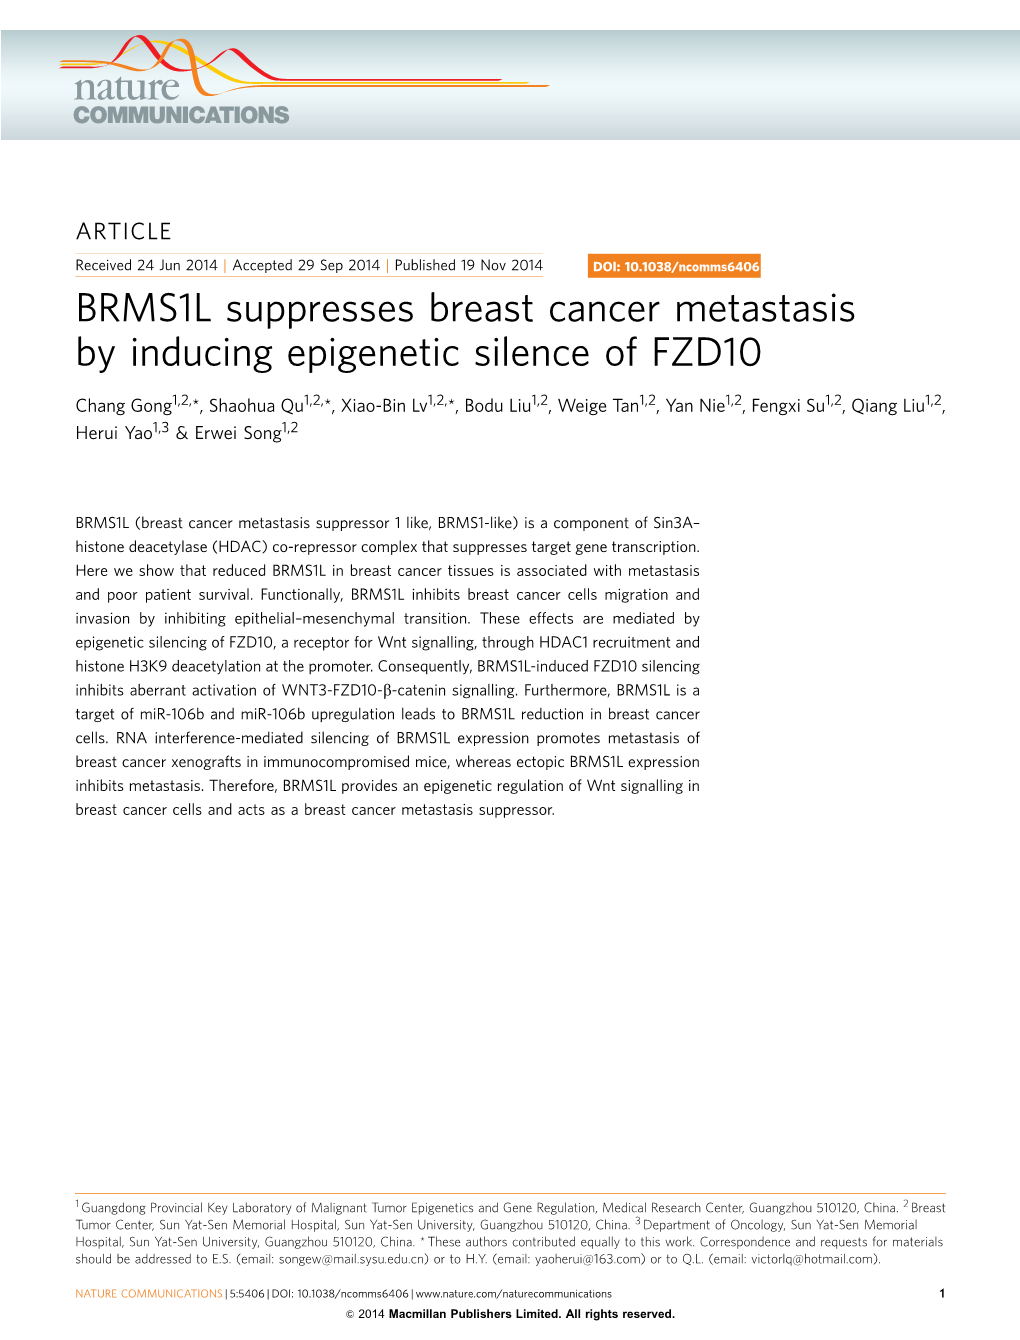 BRMS1L Suppresses Breast Cancer Metastasis by Inducing Epigenetic Silence of FZD10